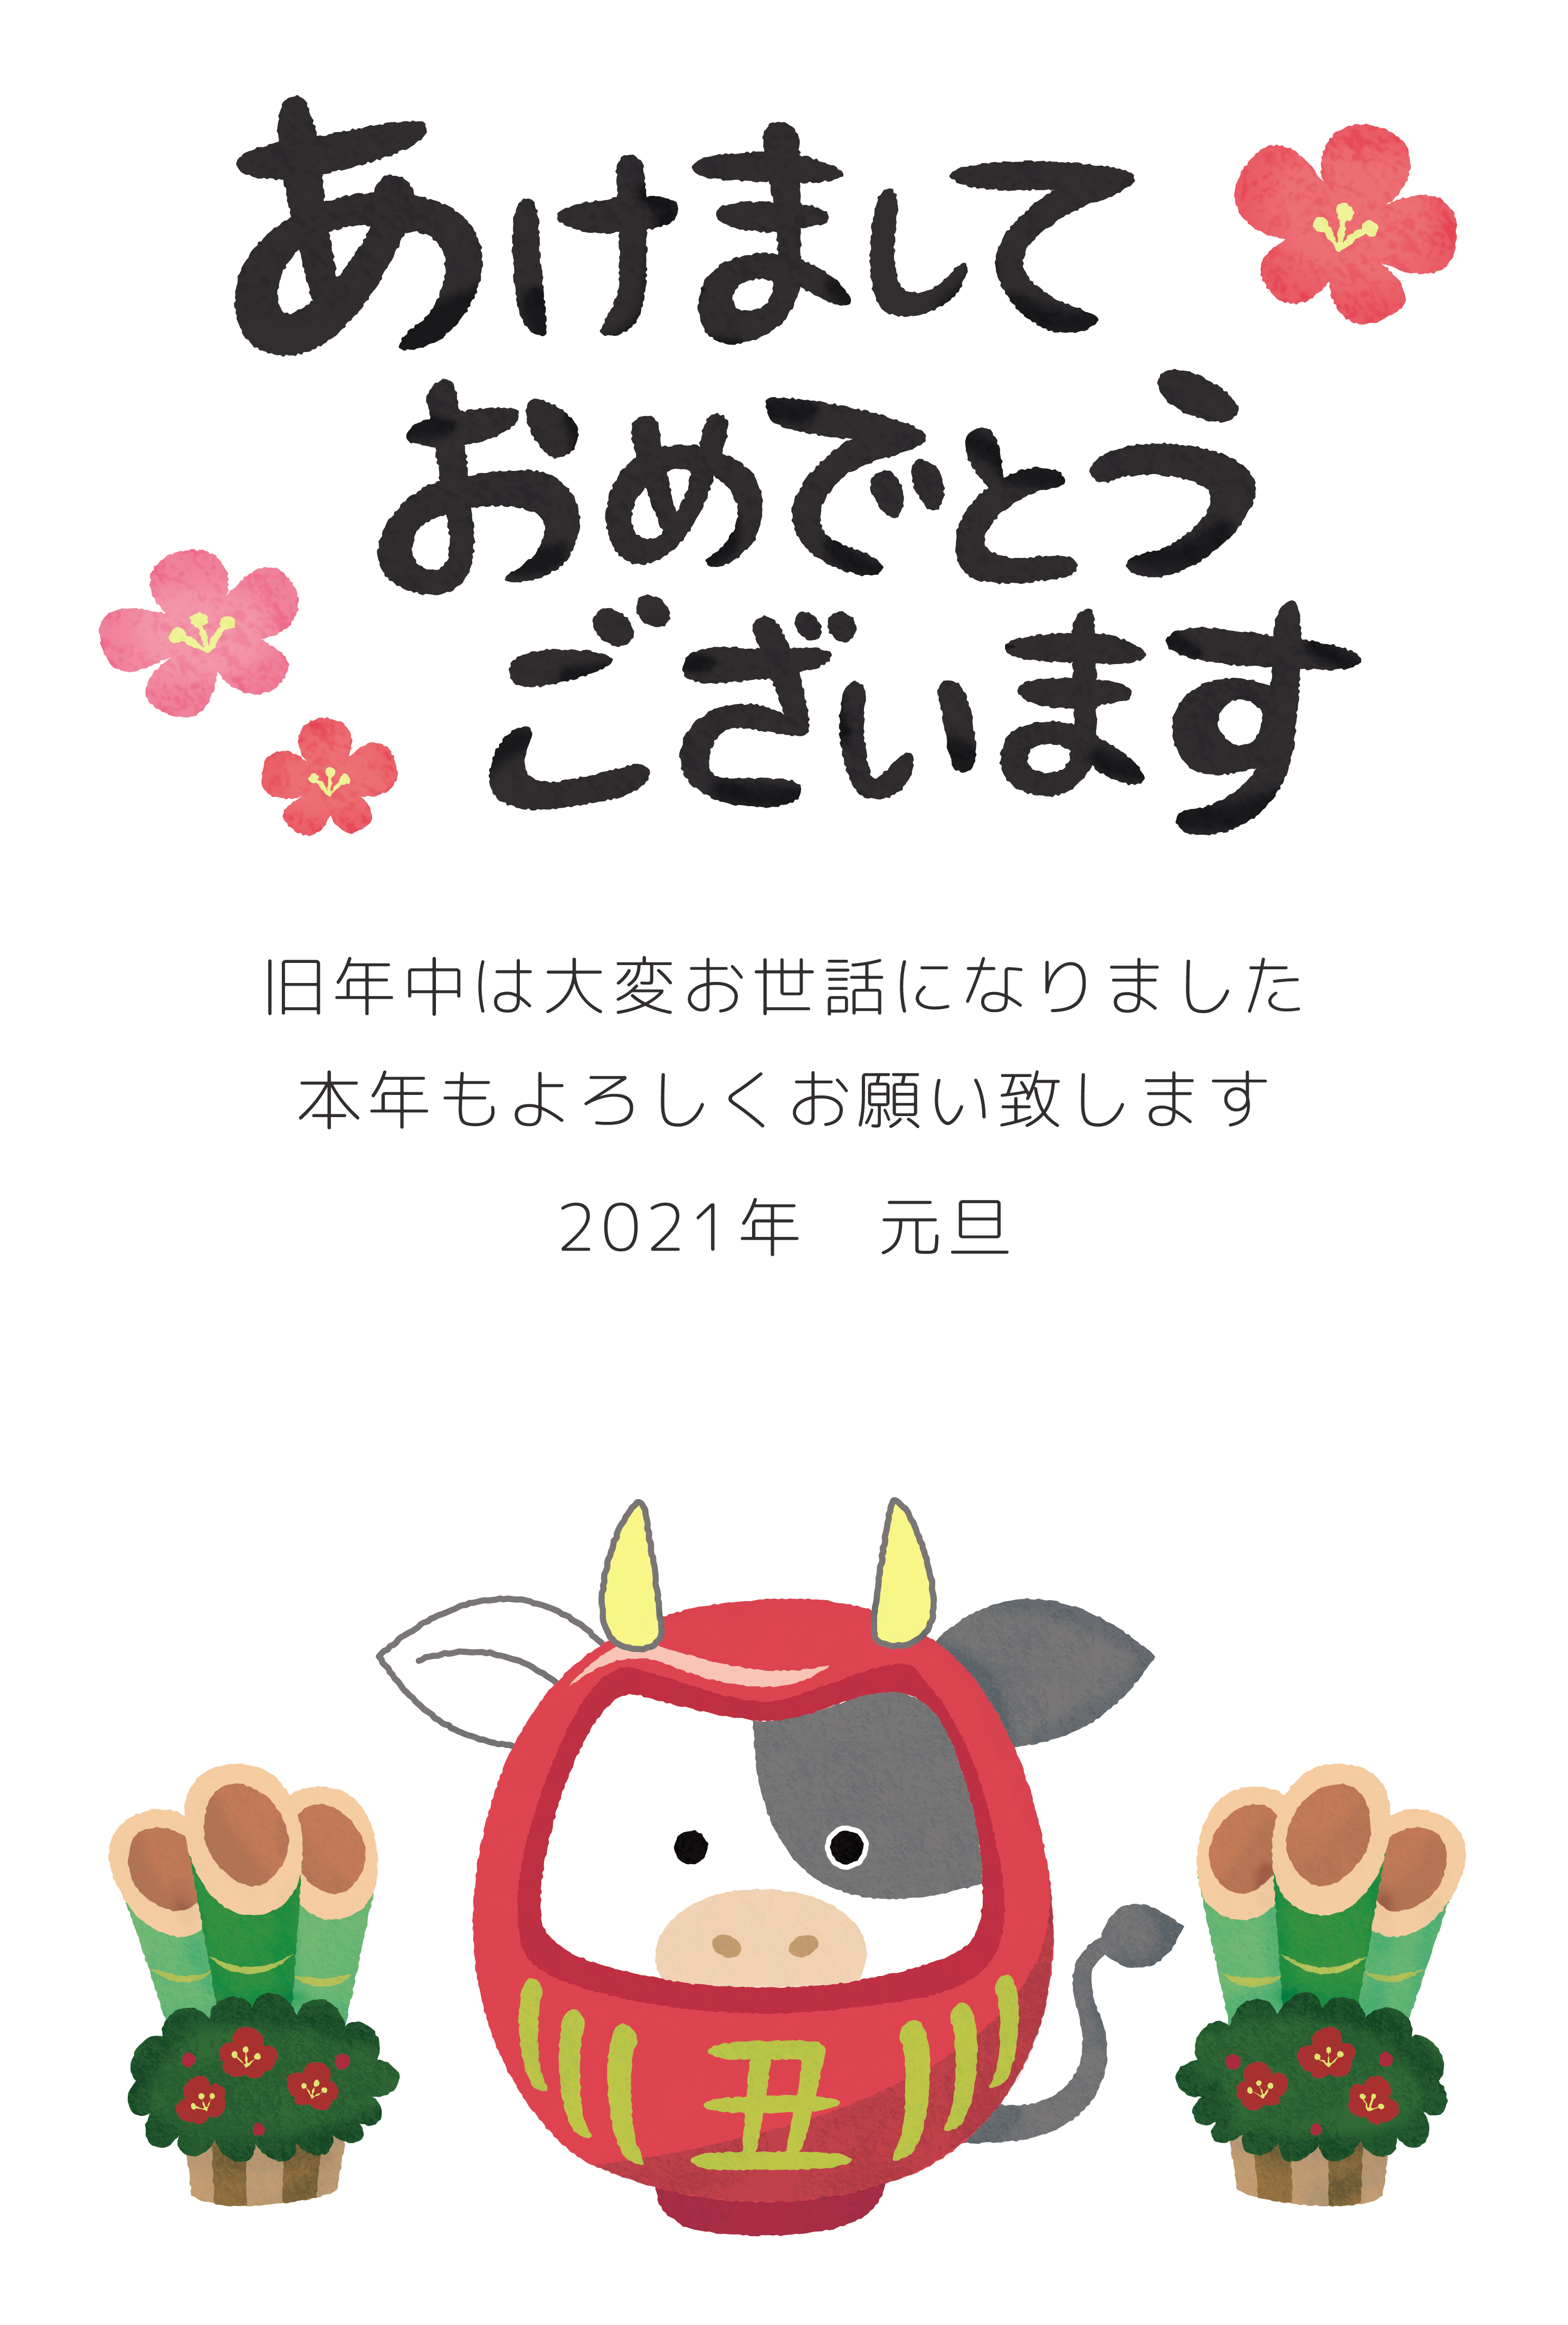 New Year S Card Free Template Cow Daruma 02 Free Clipart Illustrations Japaclip